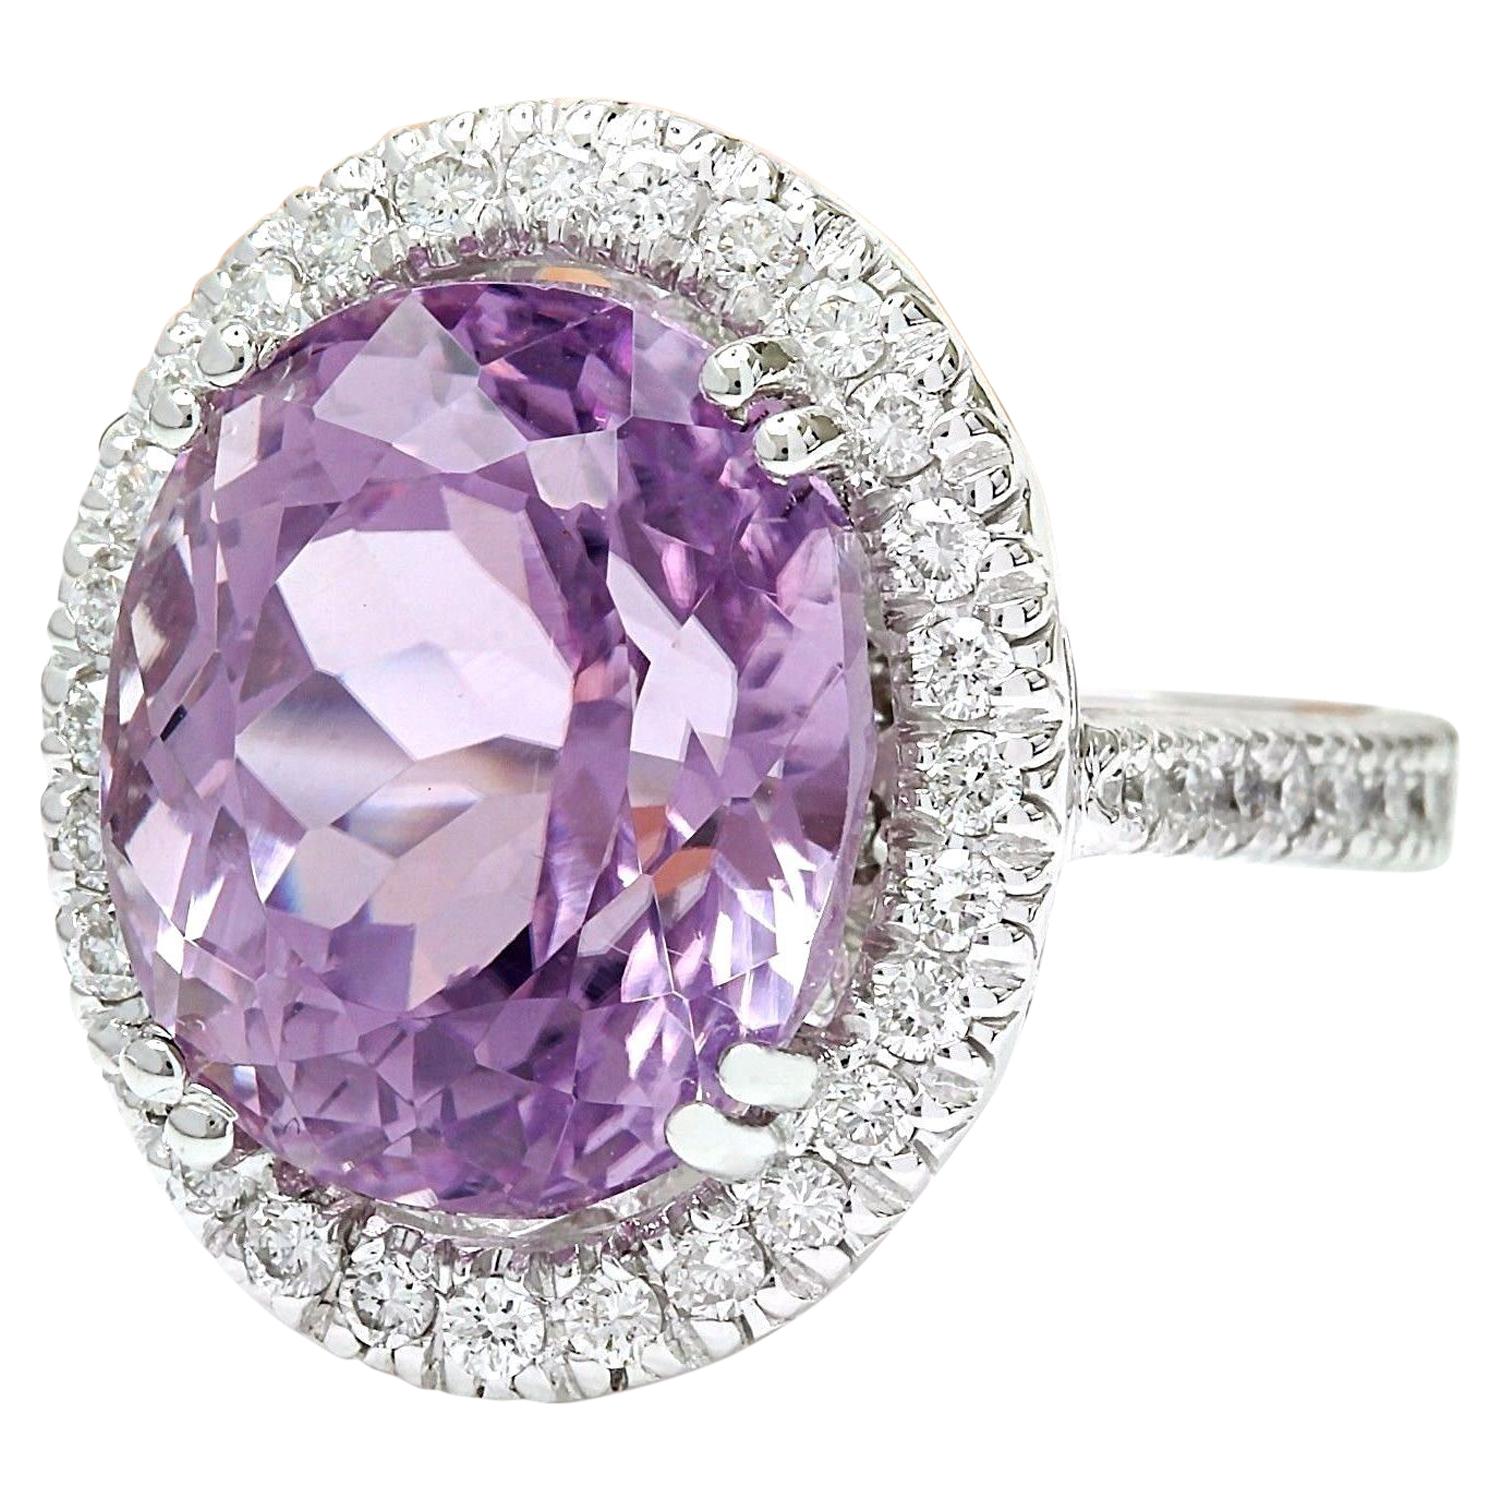 14.07 Carat Natural Kunzite 14K Solid White Gold Diamond Ring
 Item Type: Ring
 Item Style: Cocktail
 Material: 14K White Gold
 Mainstone: Kunzite
 Stone Color: Pink
 Stone Weight: 13.37 Carat
 Stone Shape: Oval
 Stone Quantity: 1
 Stone Dimensions: